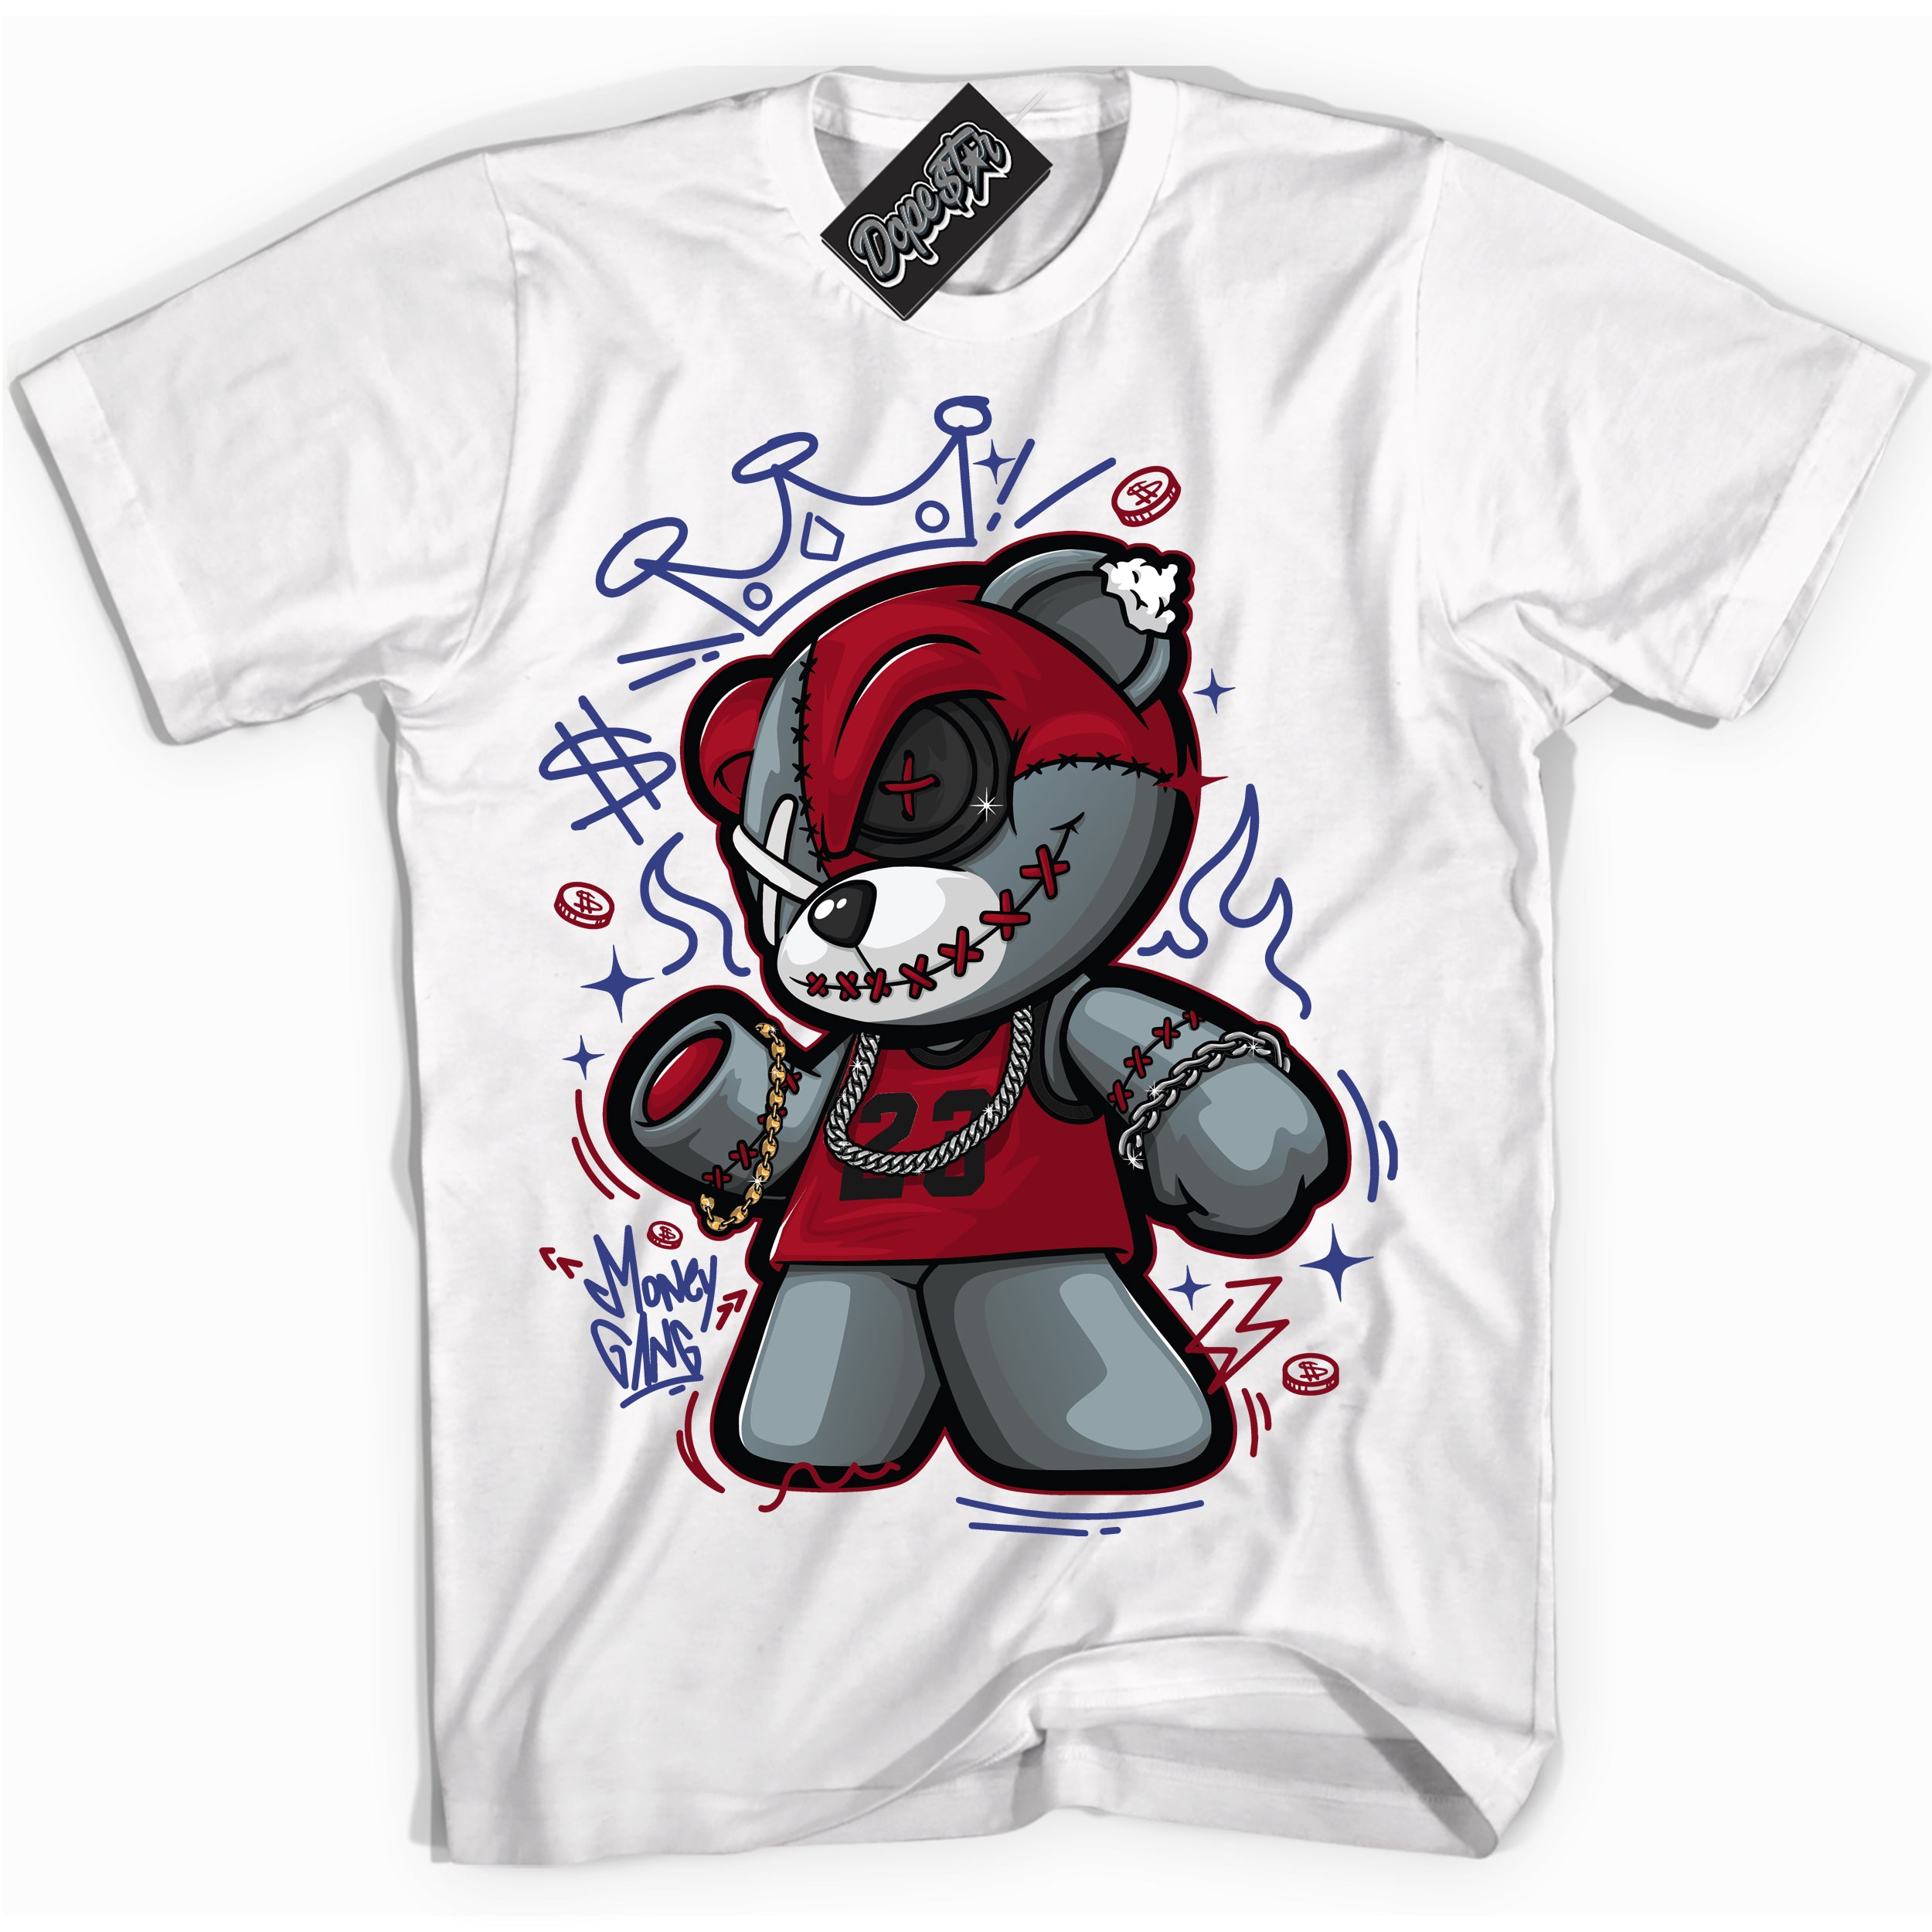 Cool White Shirt with “ Money Gang Bear ” design that perfectly matches Playoffs 8s Sneakers.